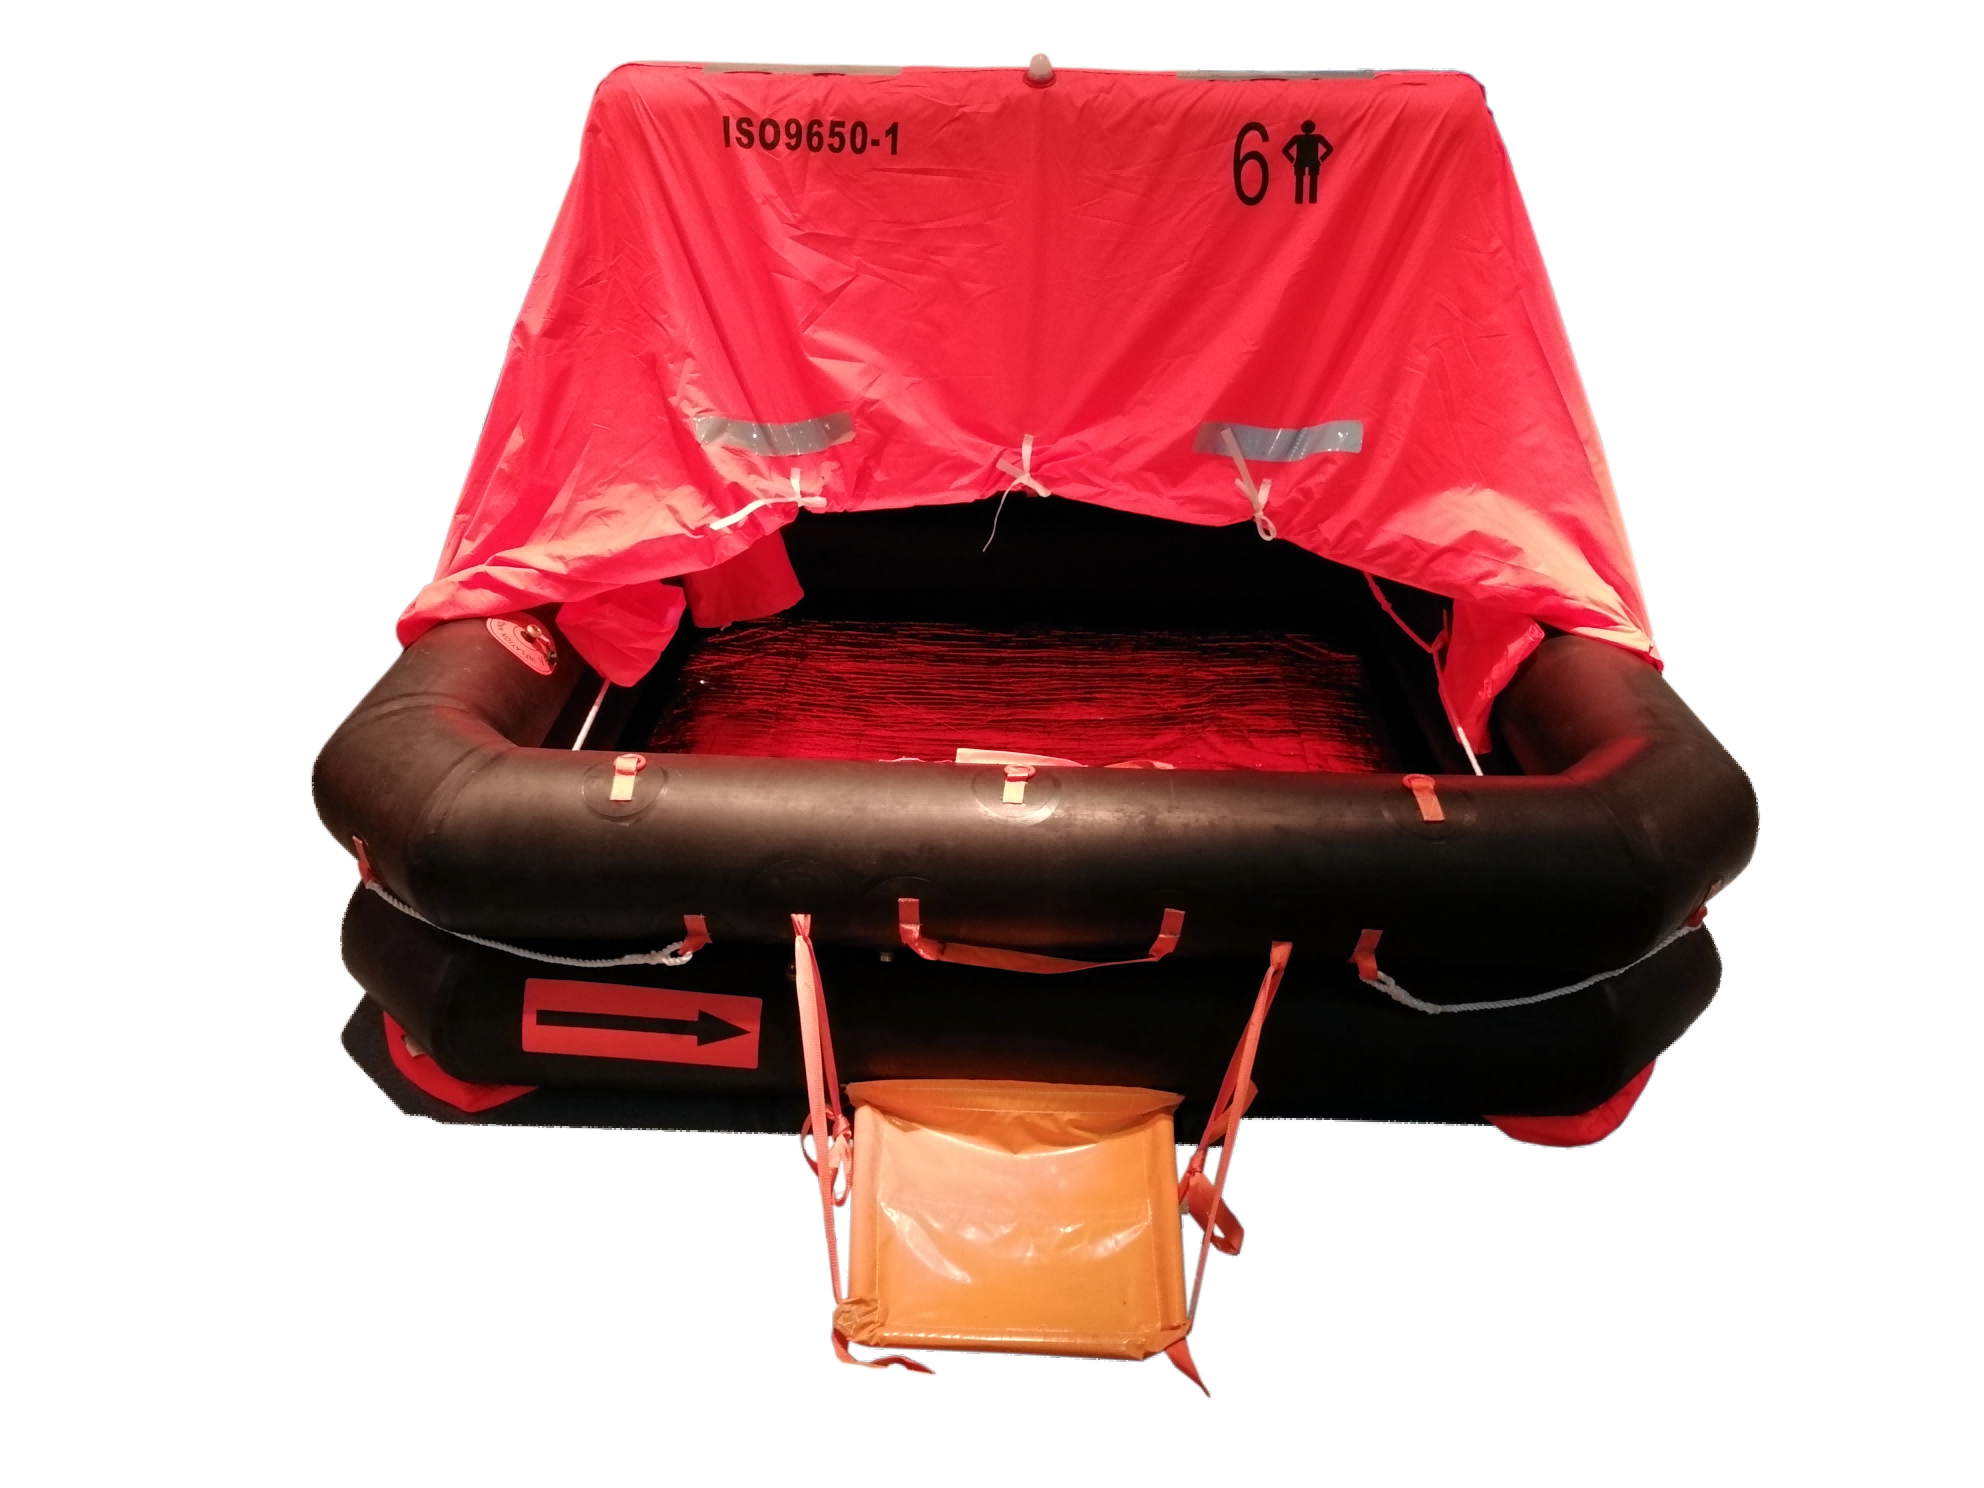 KHY type inflatable leisure liferafts